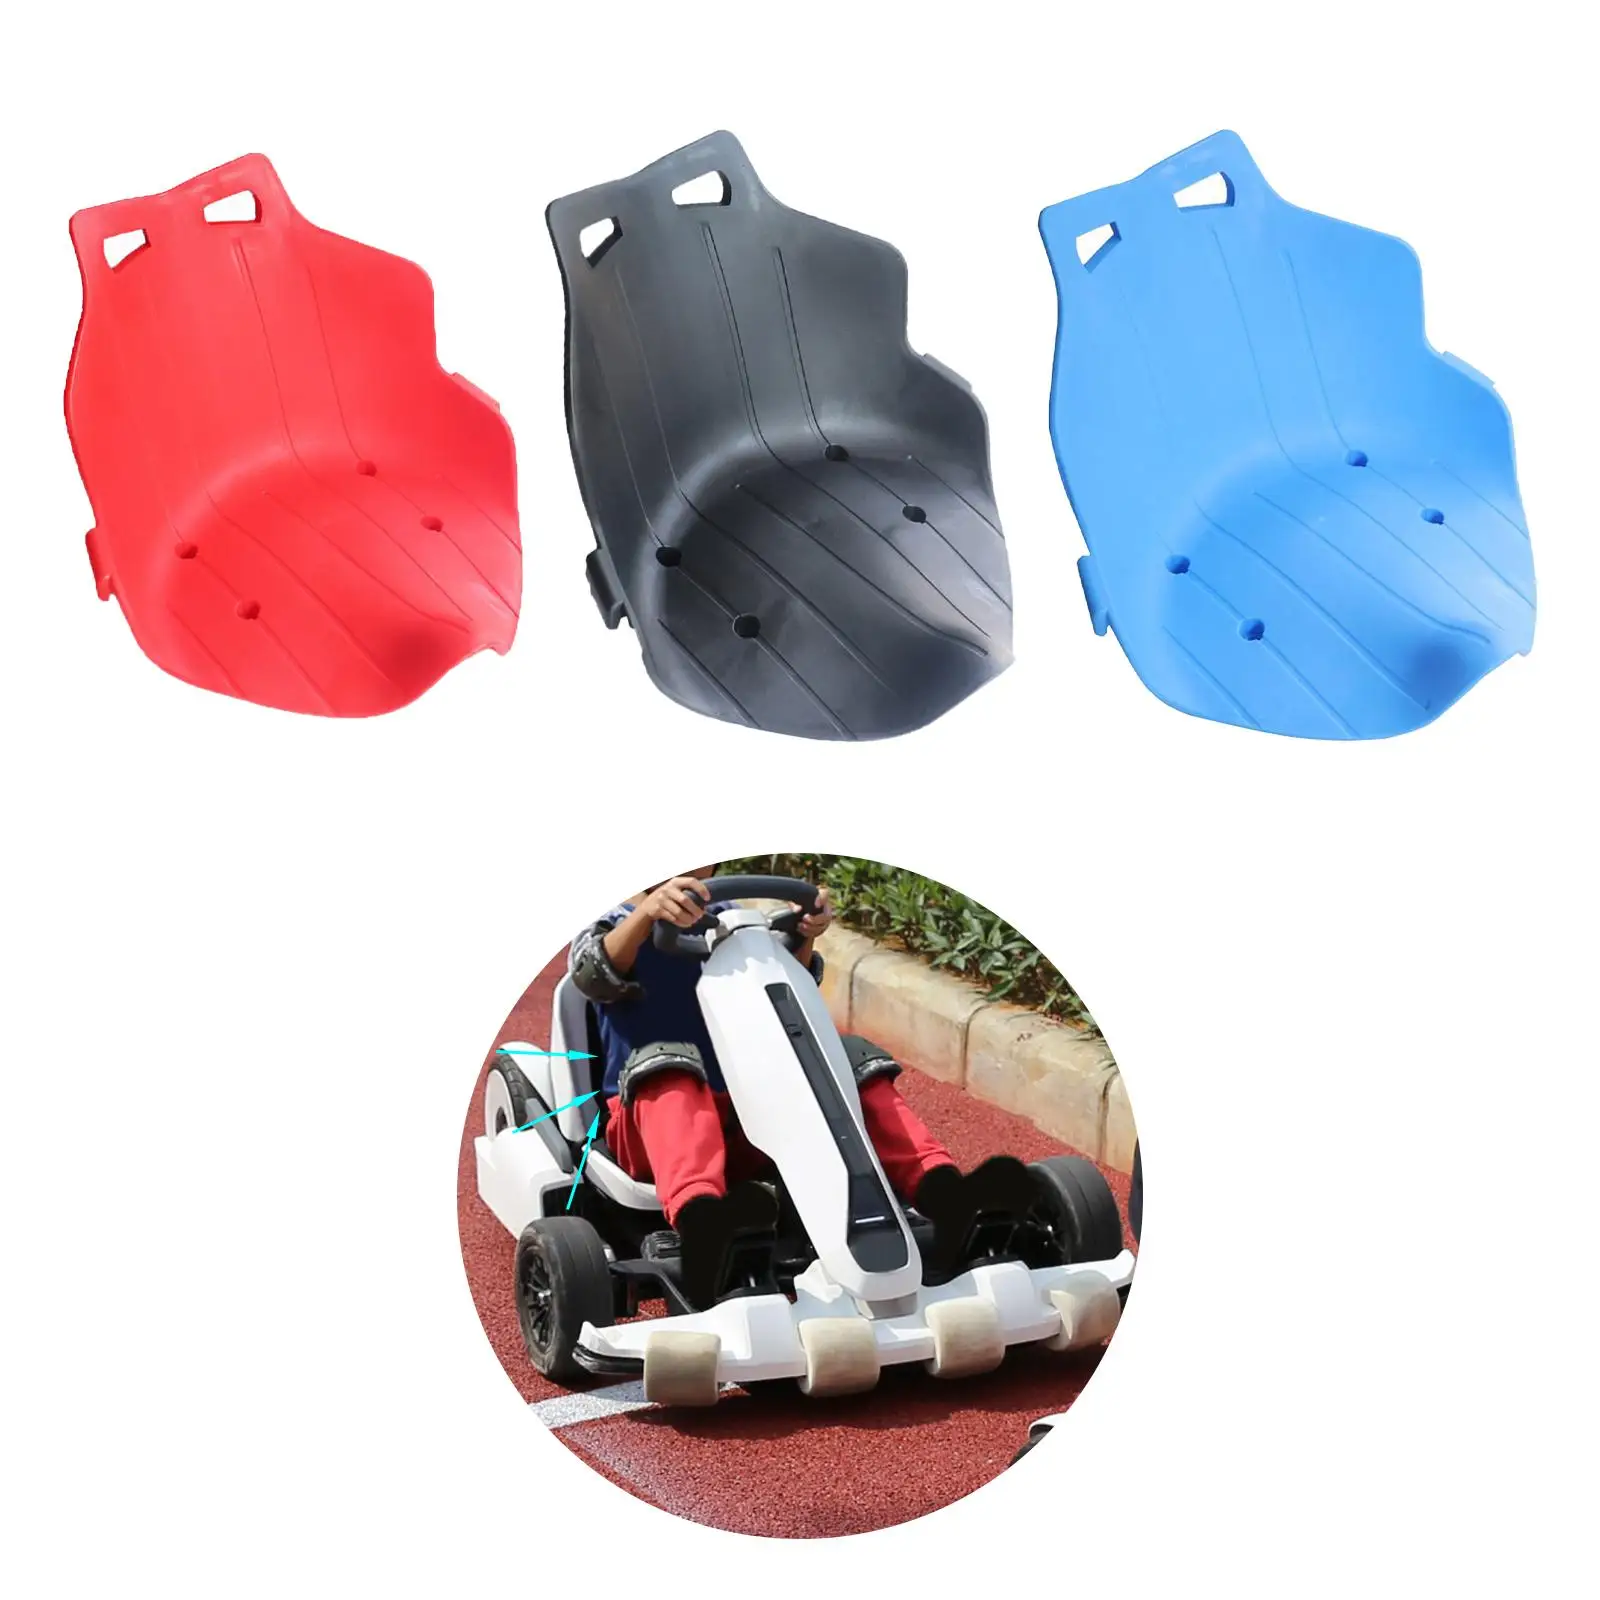 Kids Seat Attachment DIY Durable Go Karts Seat Saddle Kart Car Saddle Replacement Parts for Racing Cart Accessories